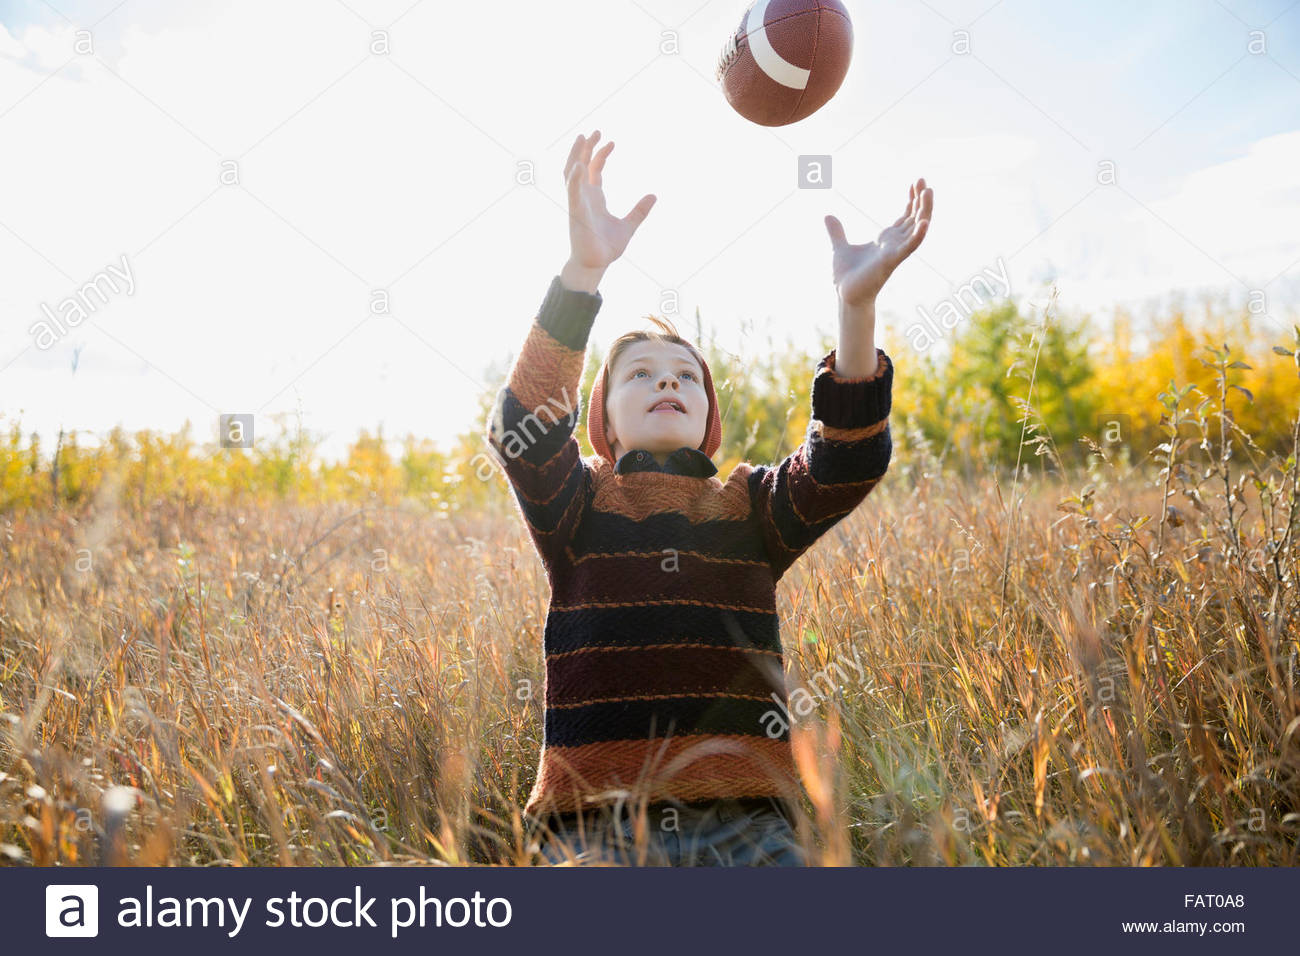 Boy catching ball in sunny field Stock Photo